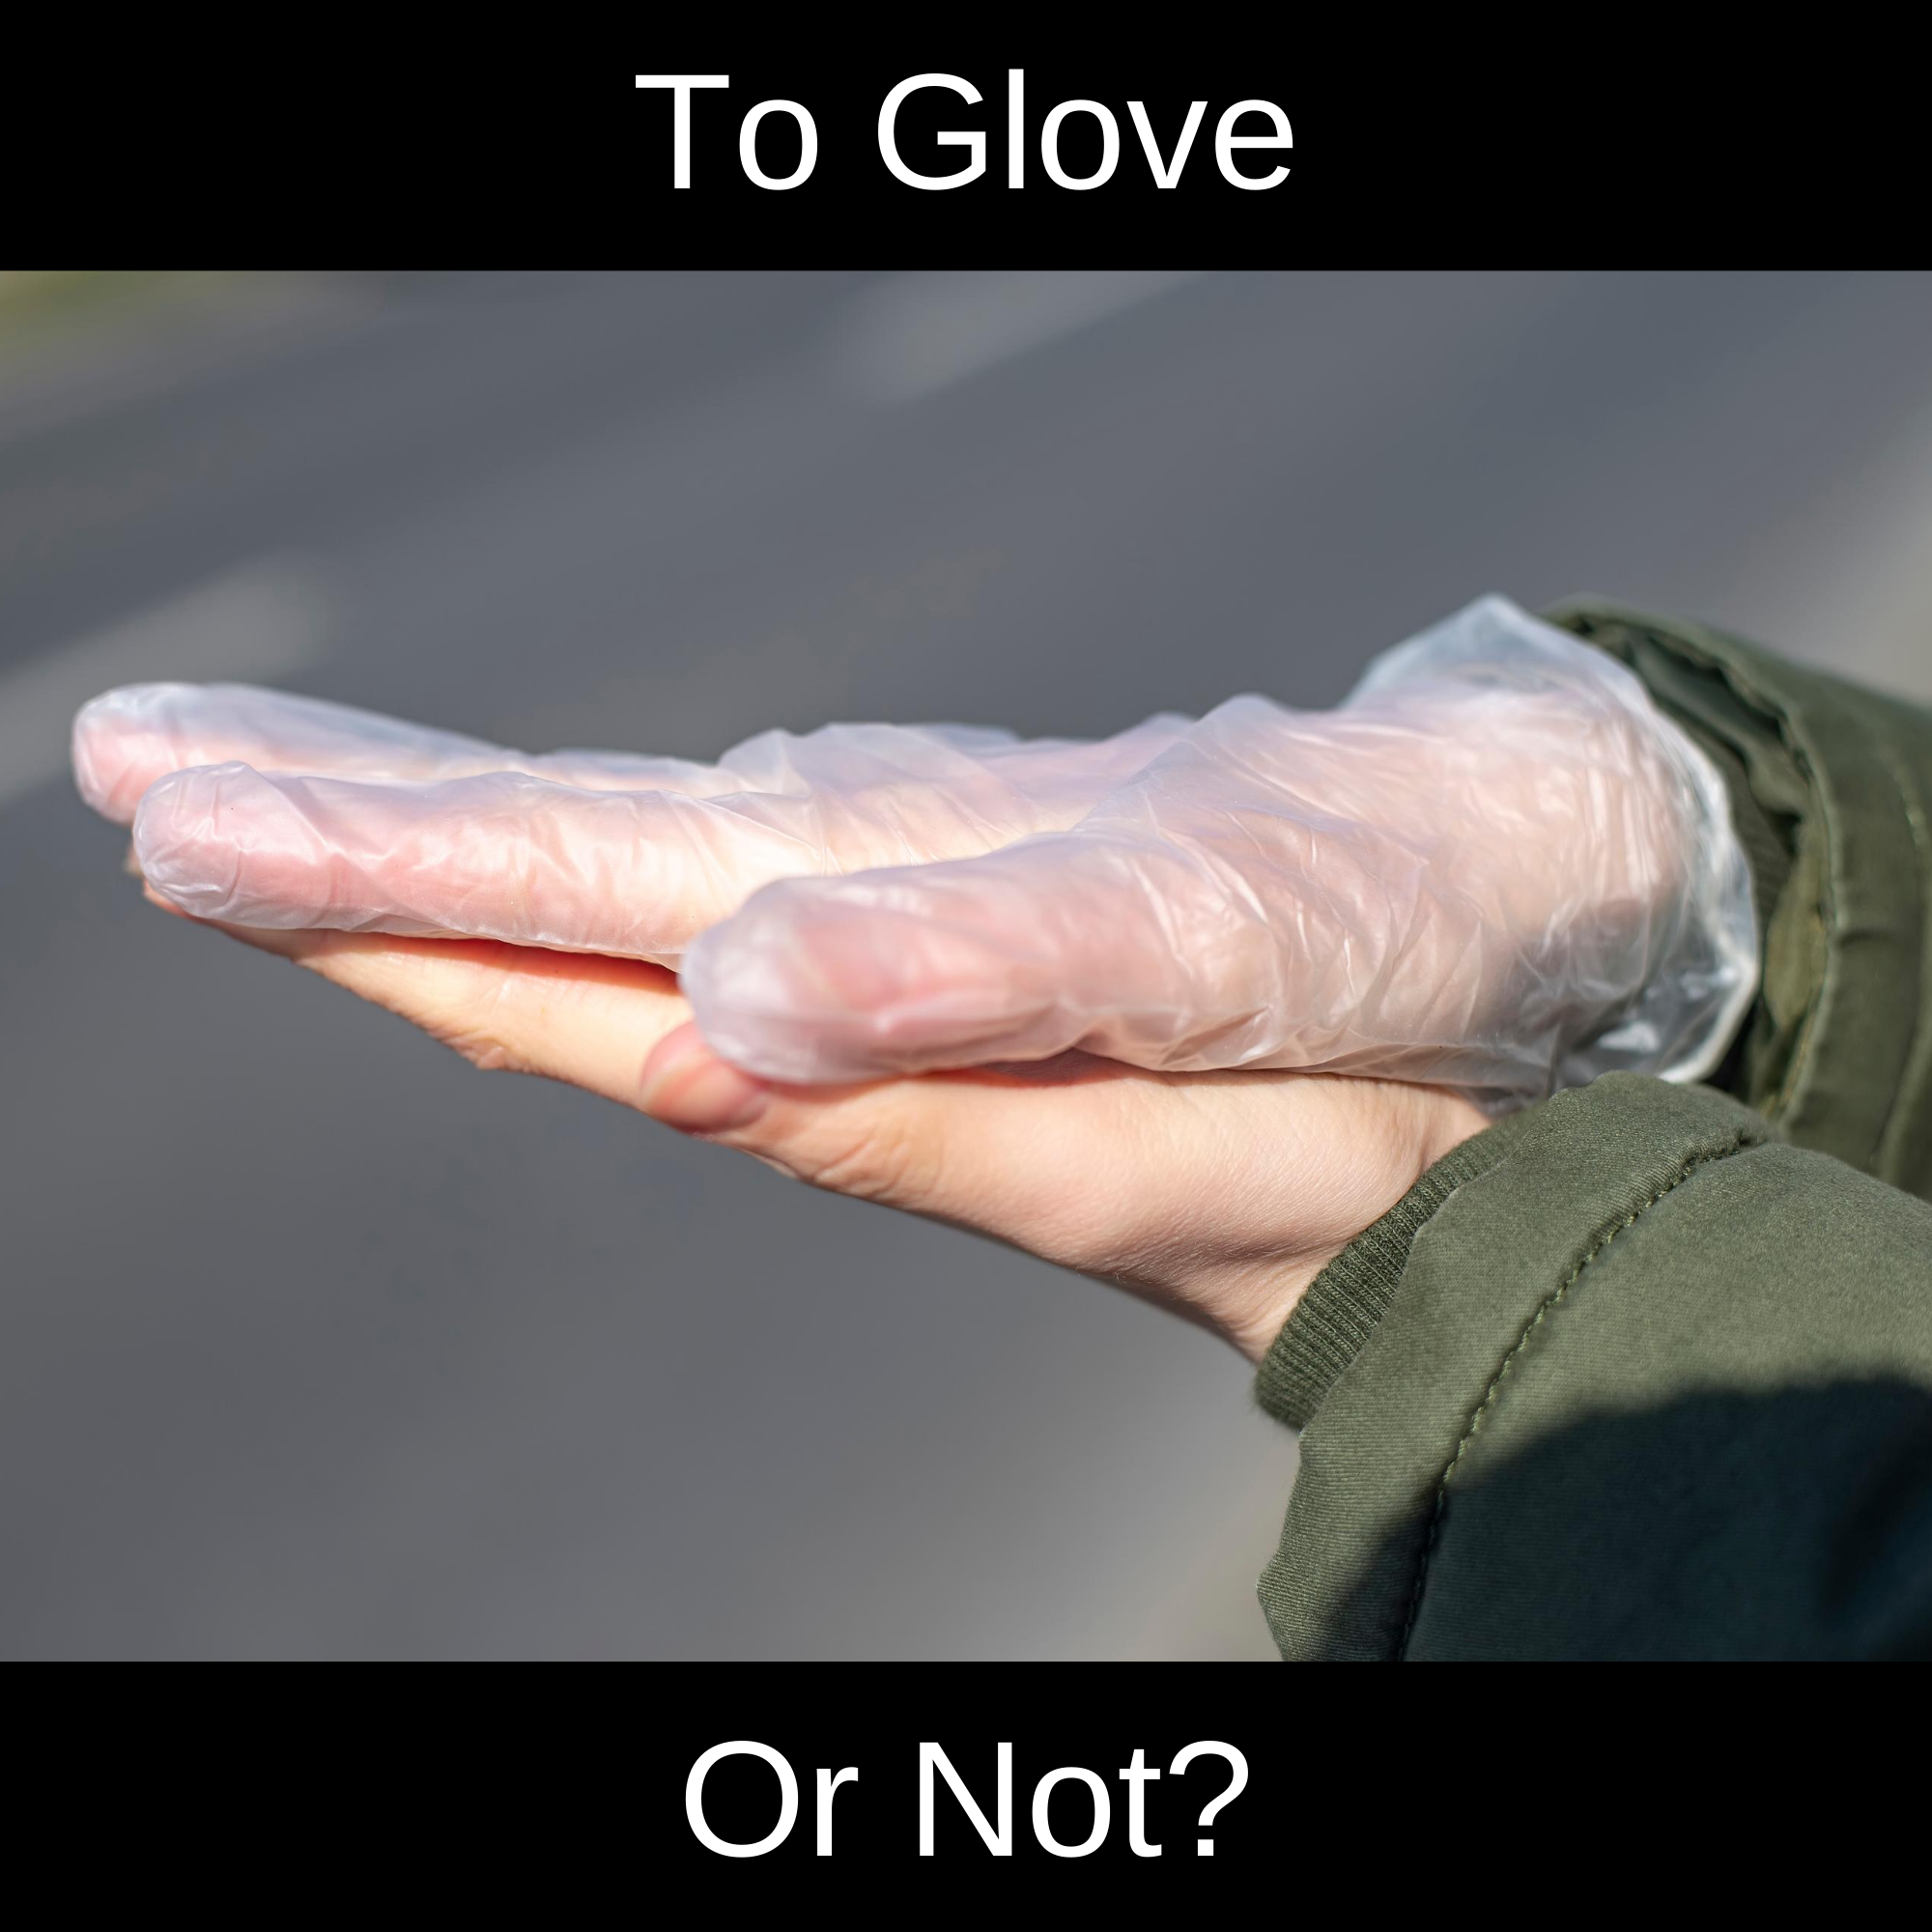 Why don't we wear disposable gloves?